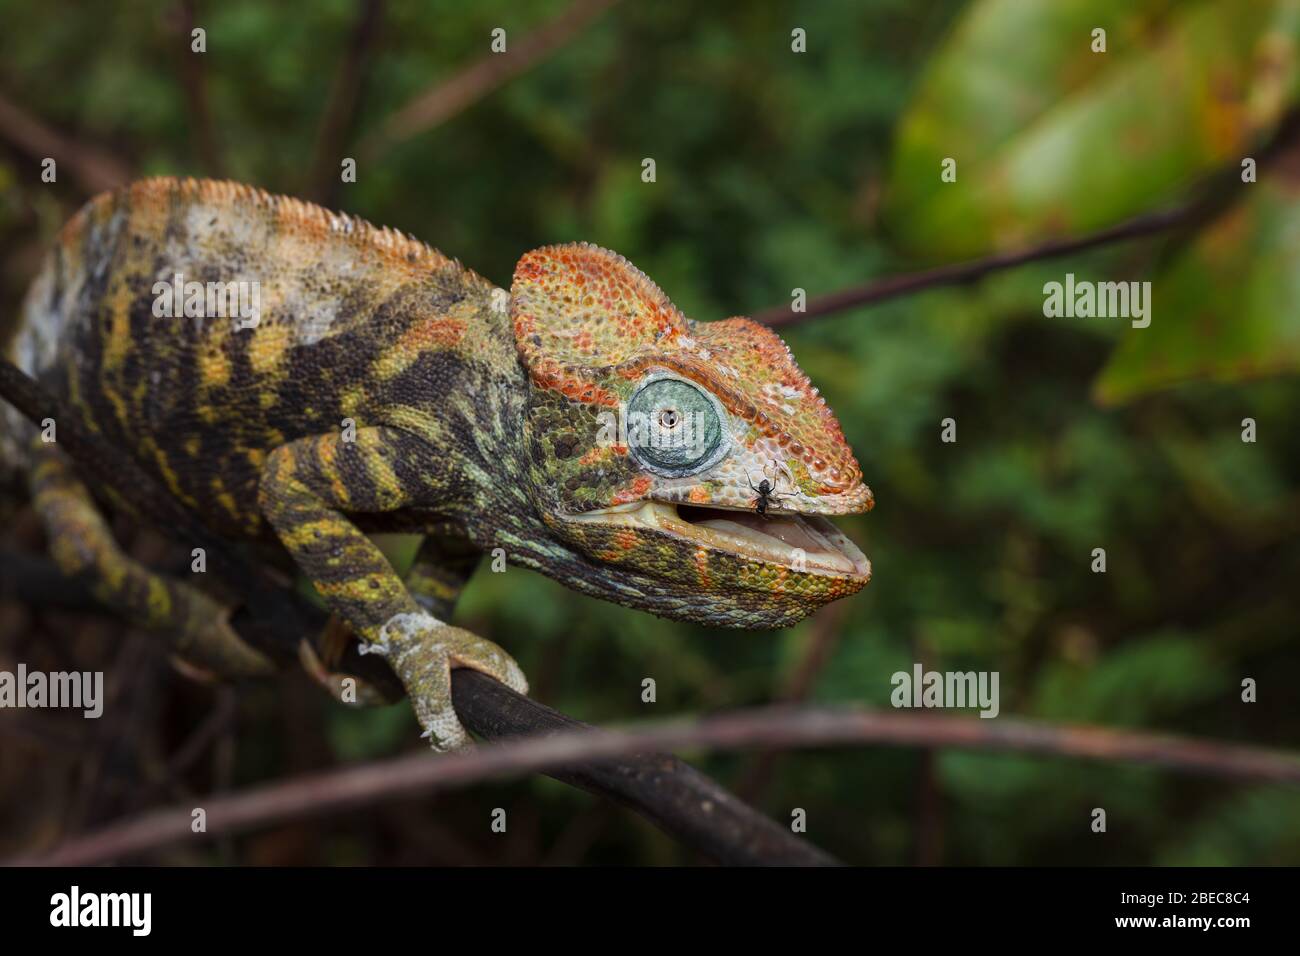 Close-up of a chameleon on a tree Stock Photo